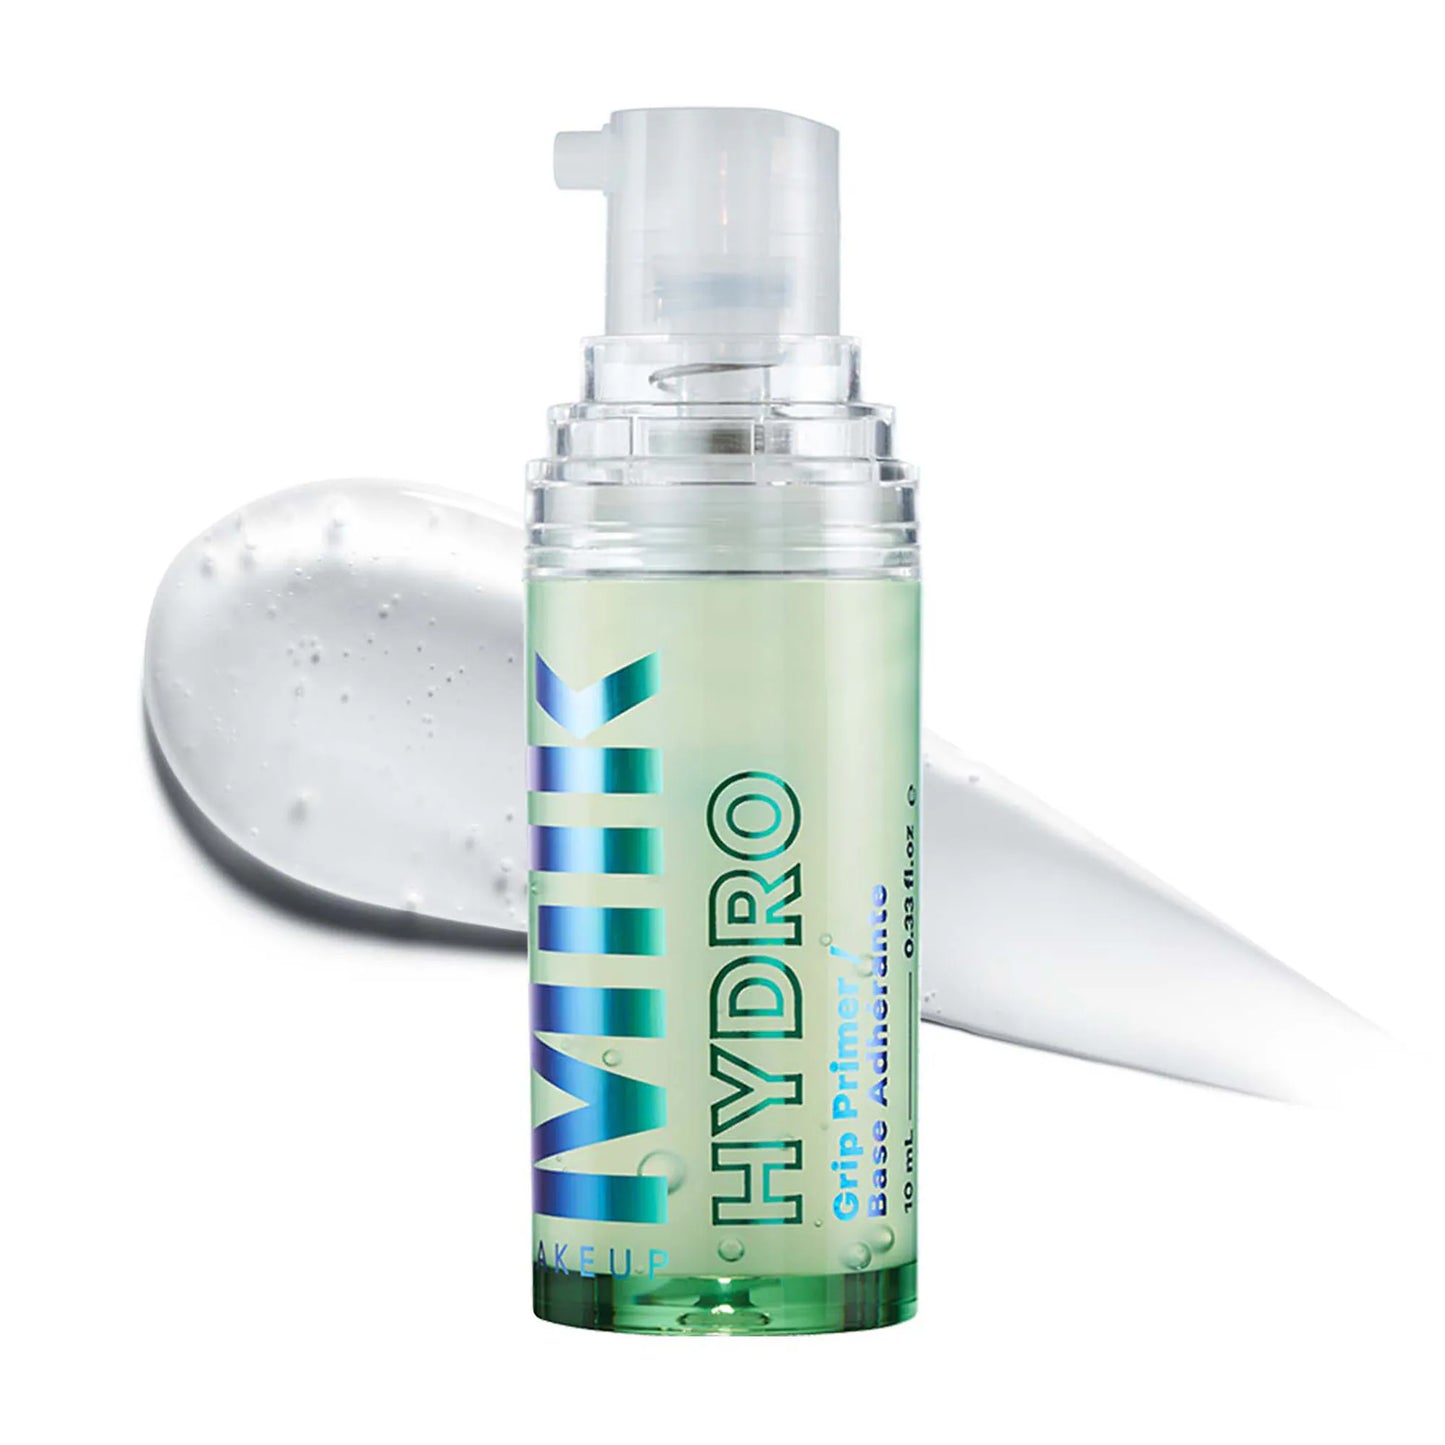 MINI - Hydro Grip Hydrating Makeup Primer with Hyaluronic Acid + Niacinamide